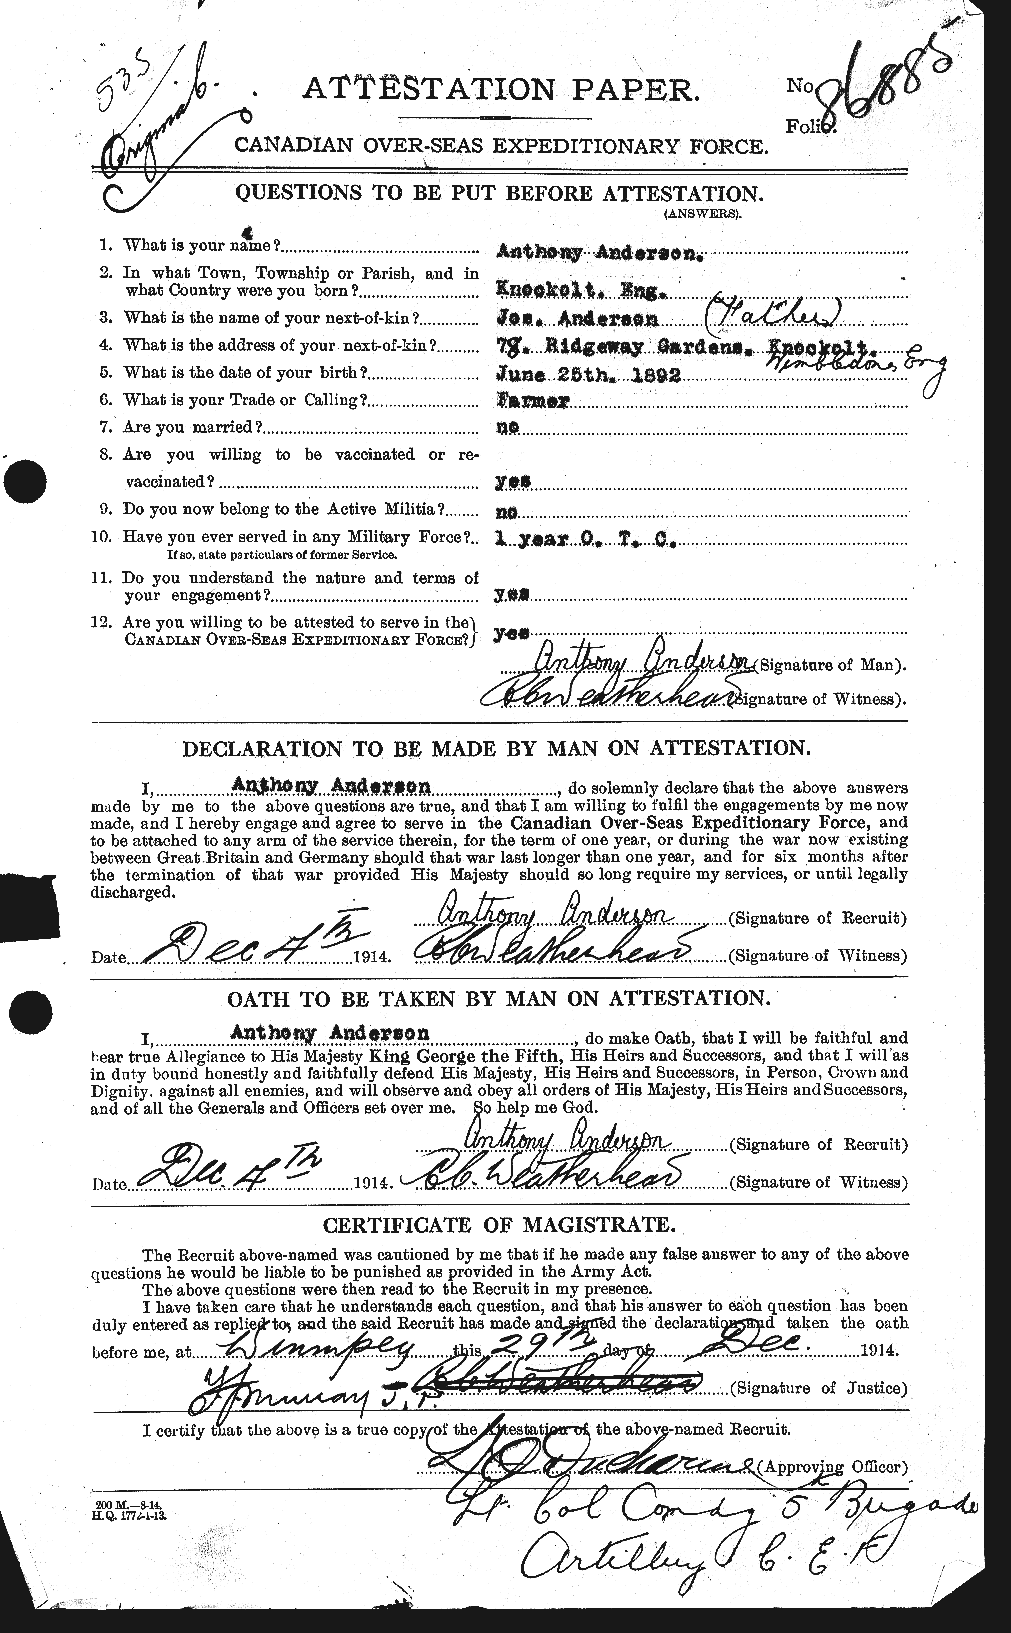 Personnel Records of the First World War - CEF 209384a